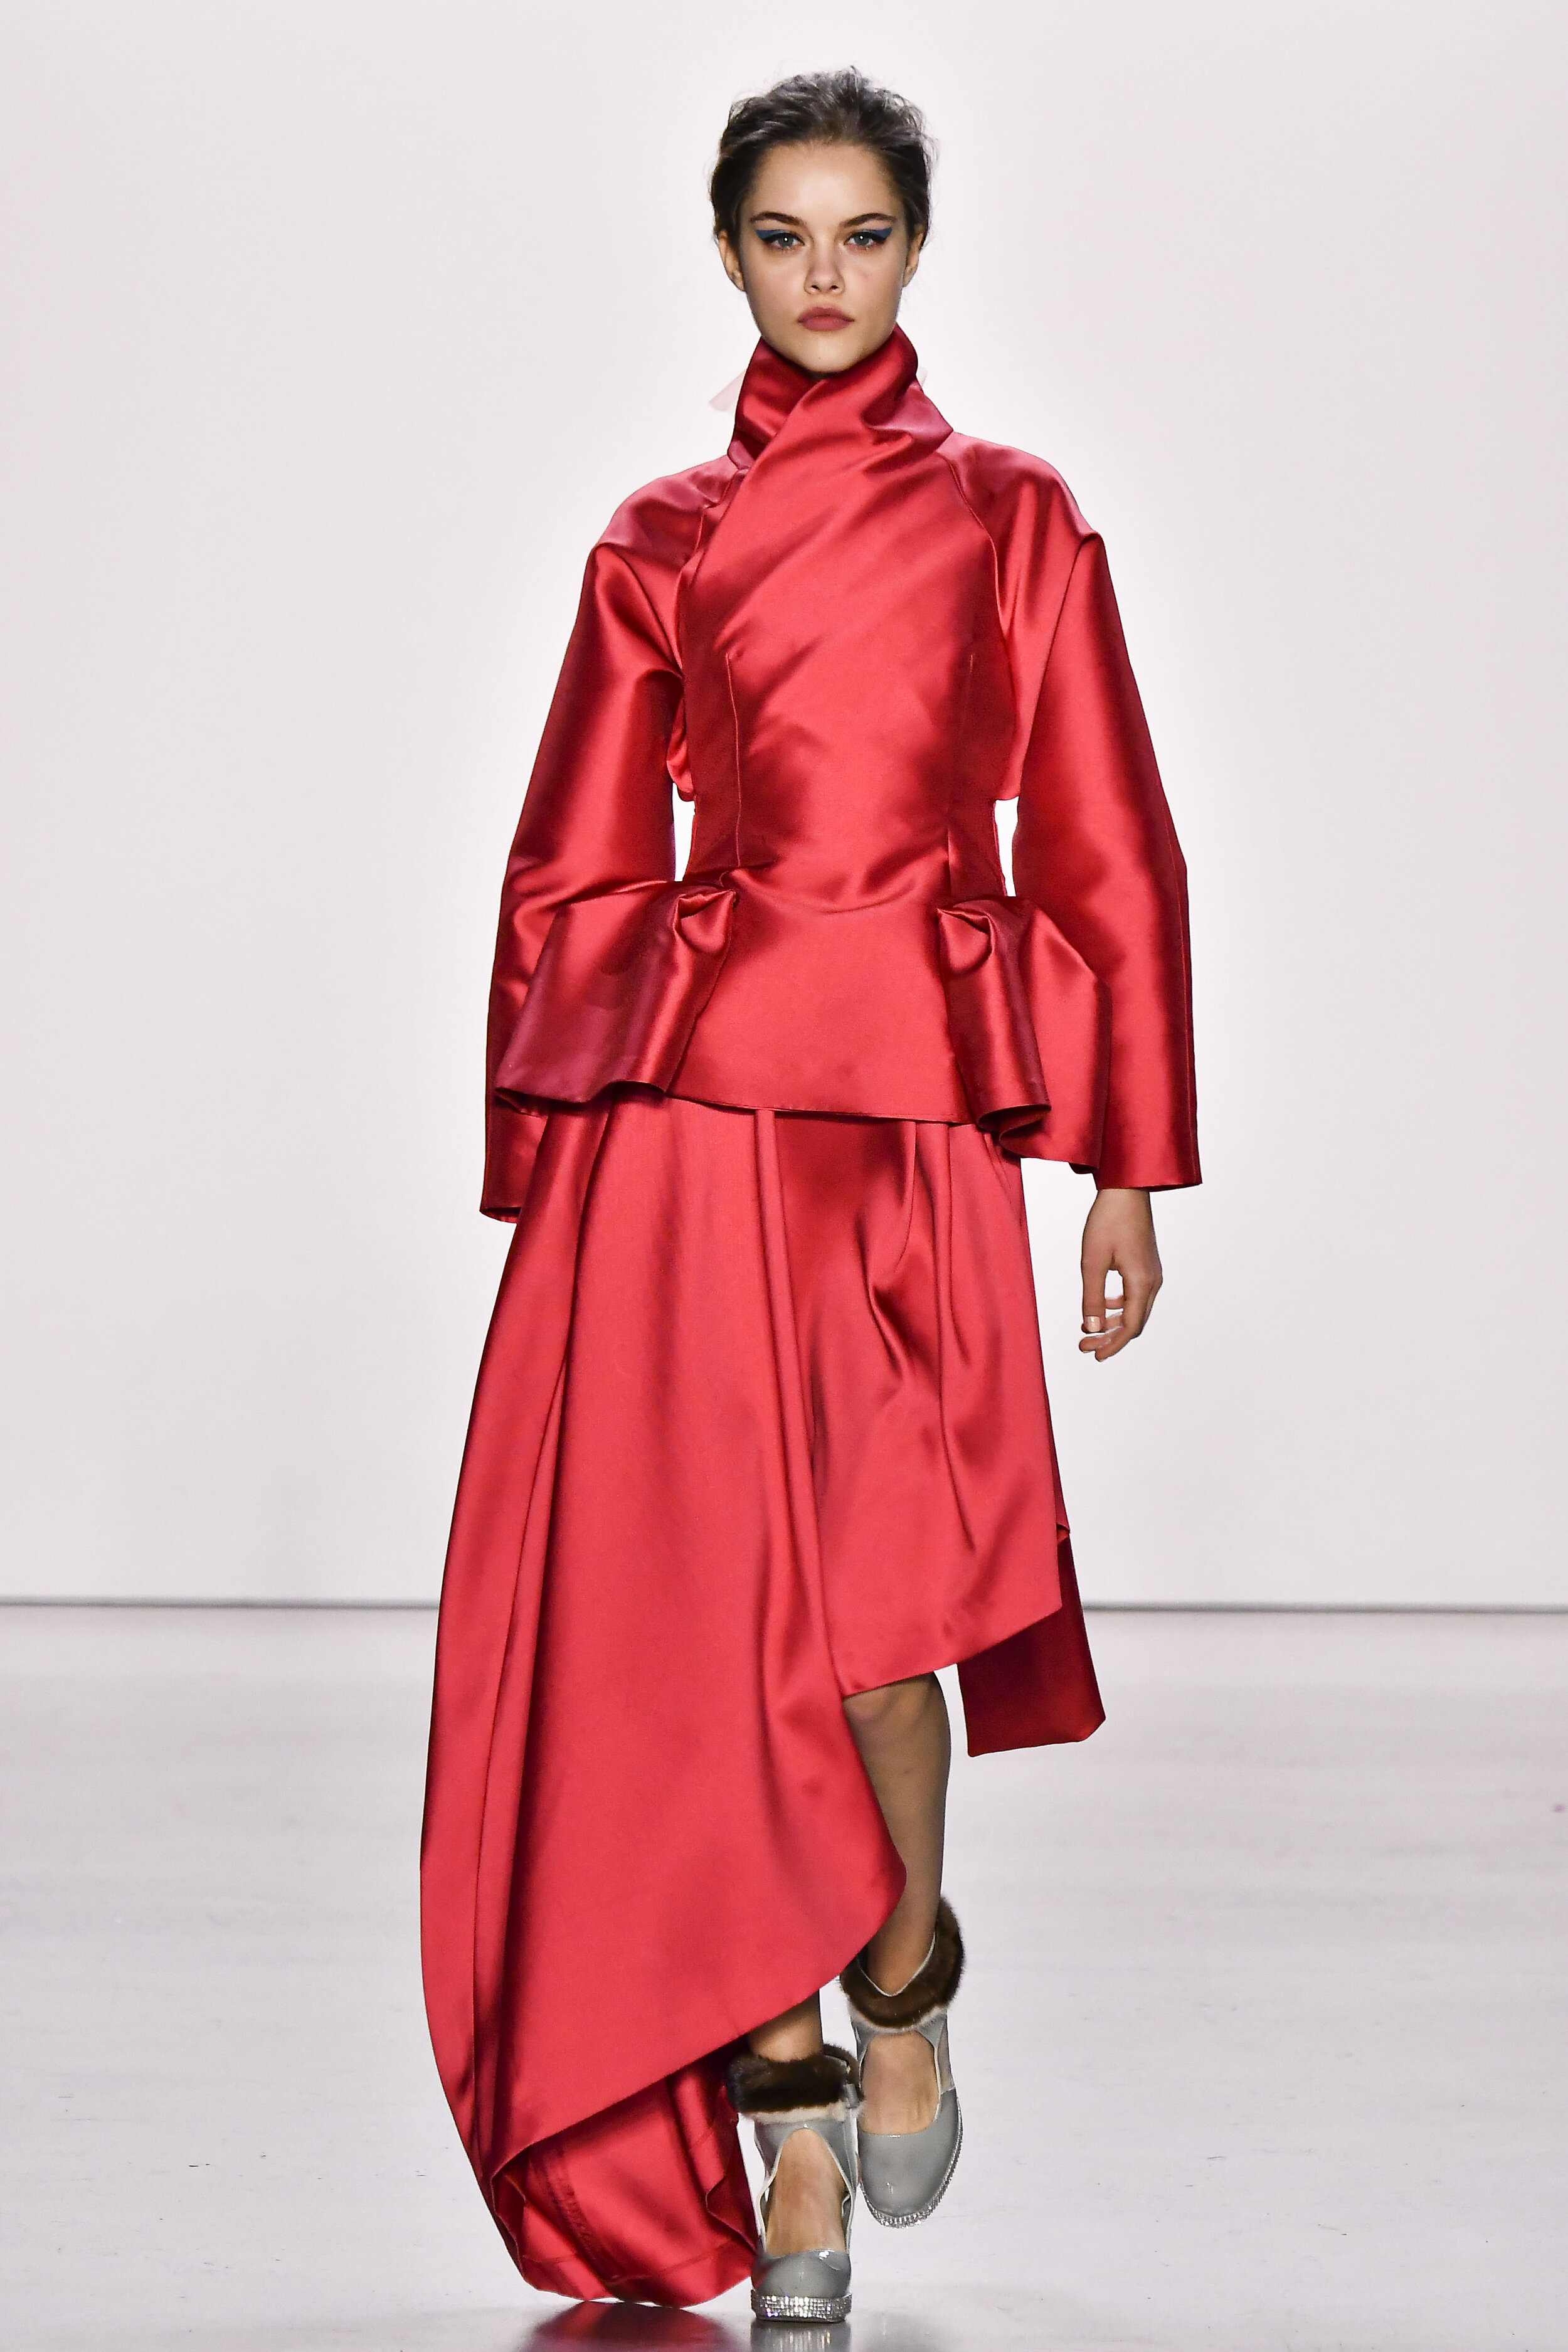 SON JUNG WAN COLLECTION NYFW FALL 2020